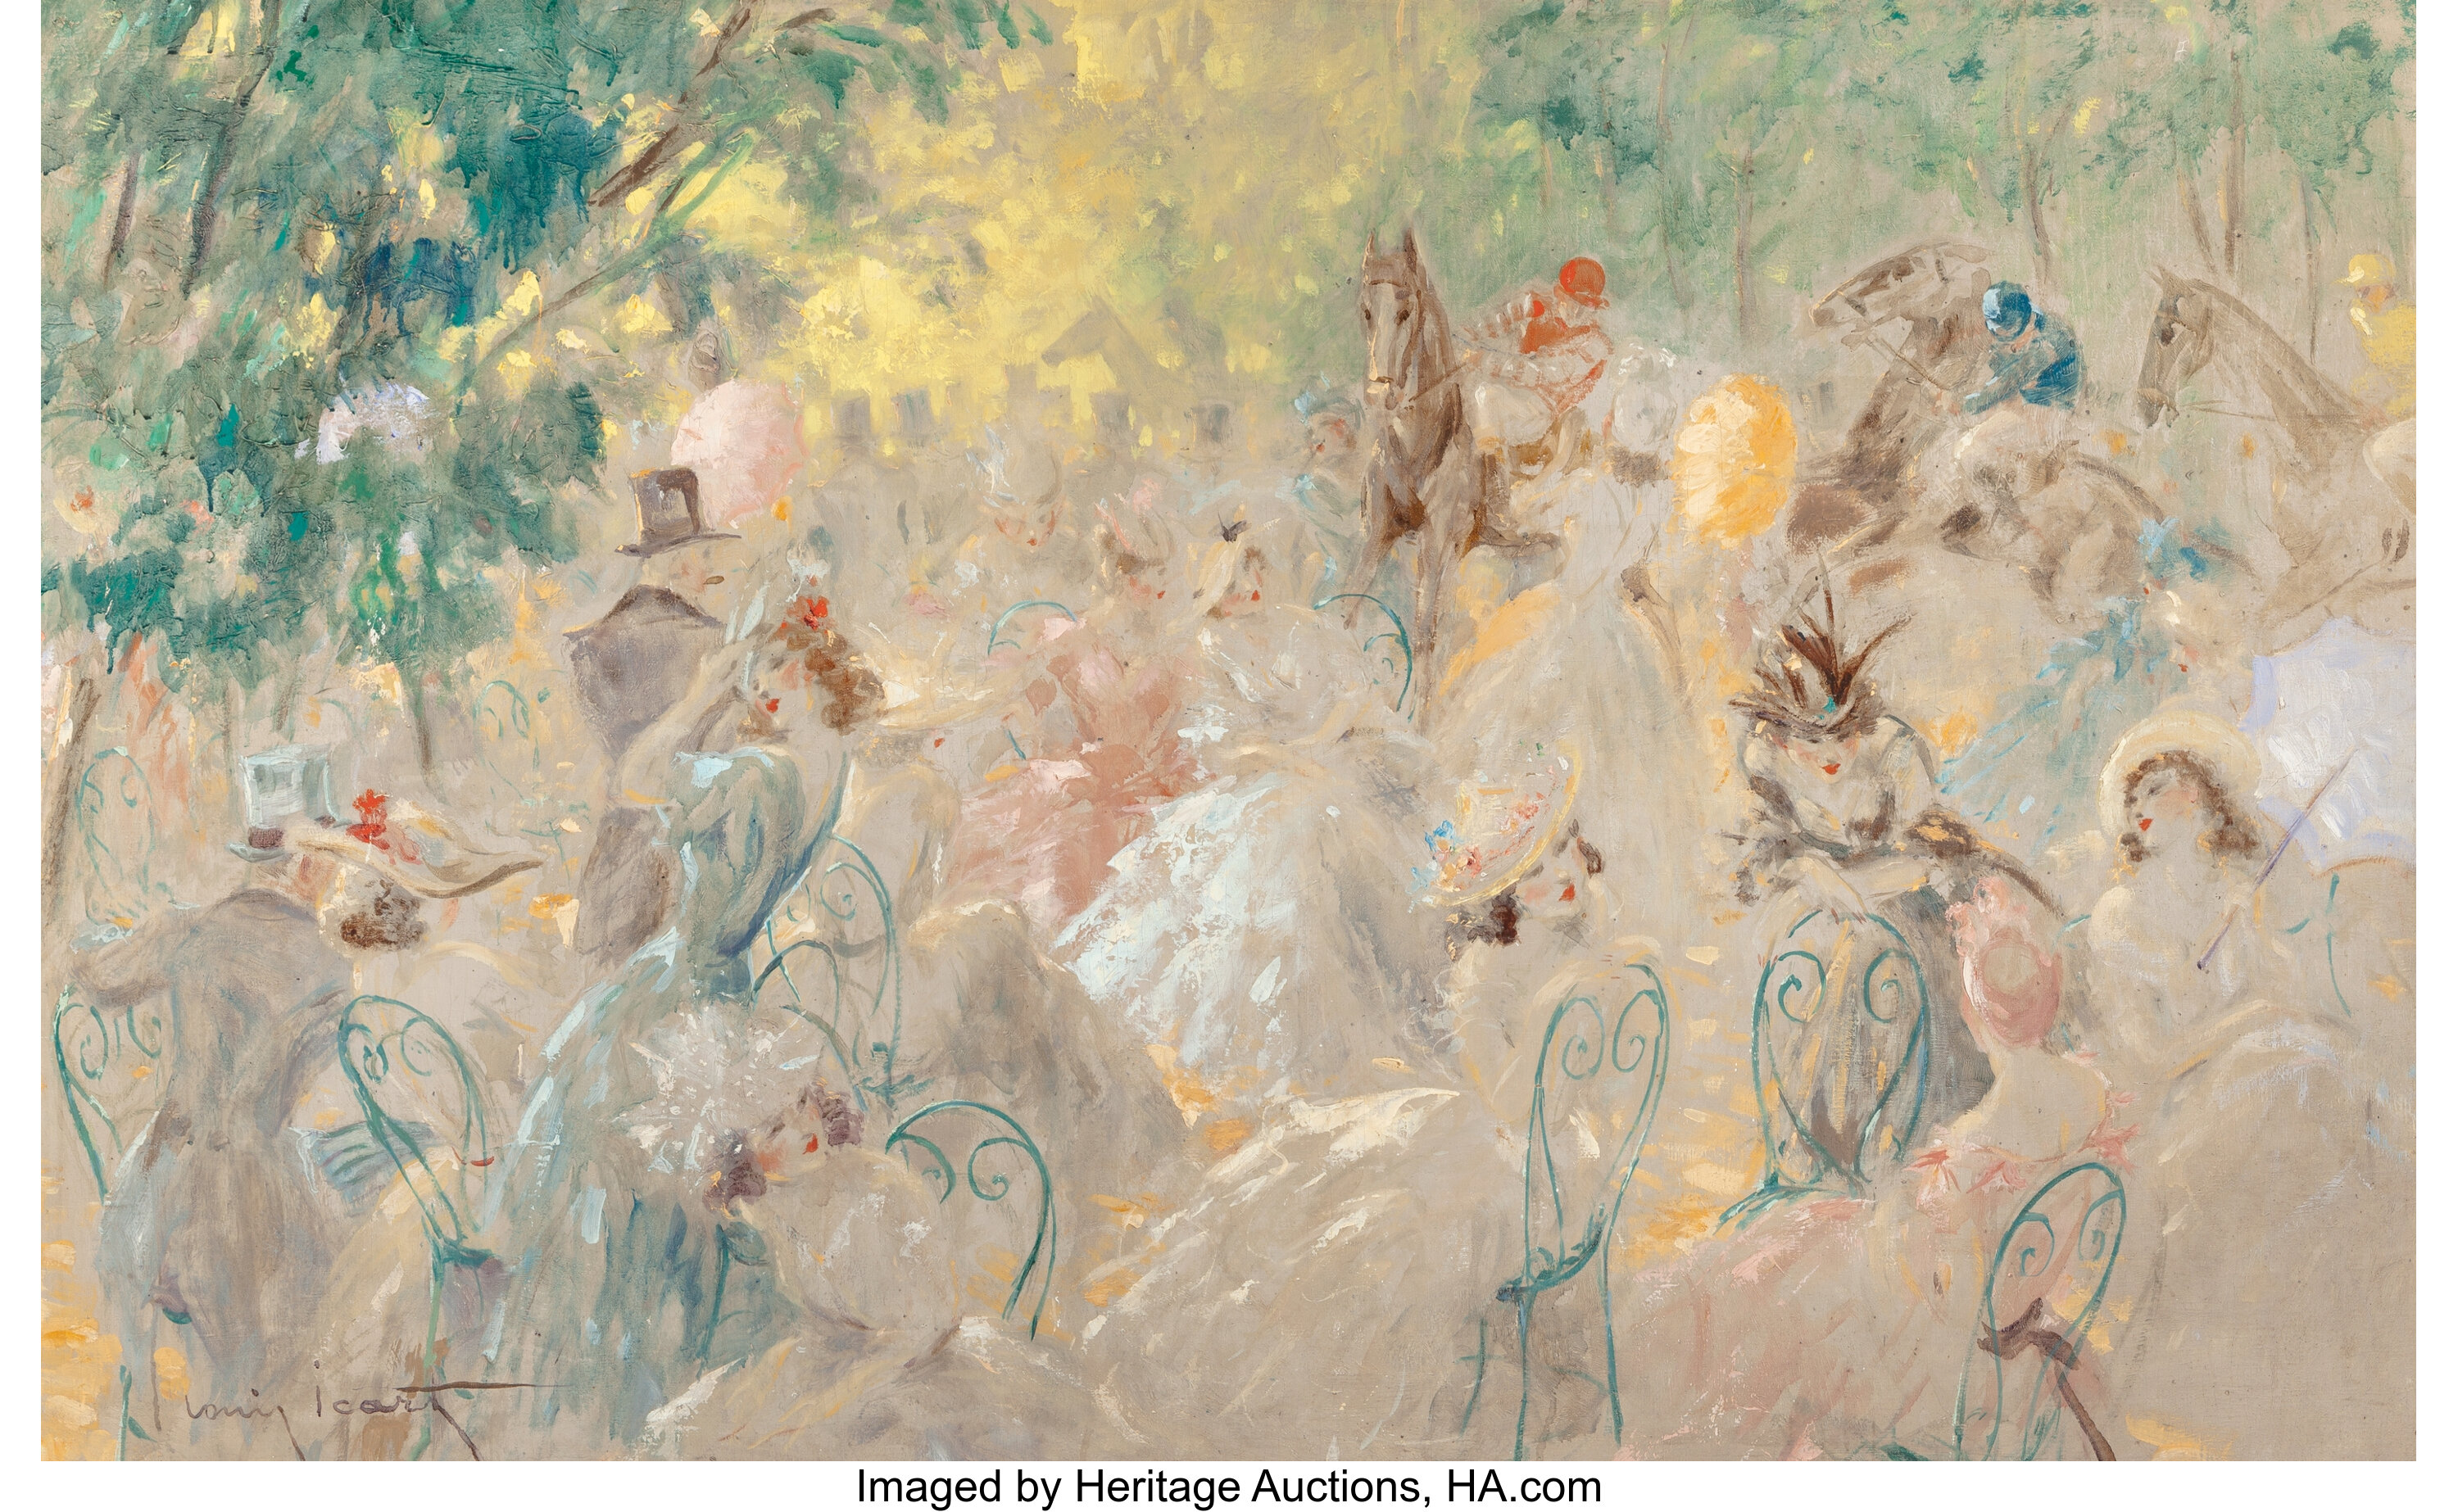 Louis Icart Paintings for Sale | Value Guide | Heritage Auctions